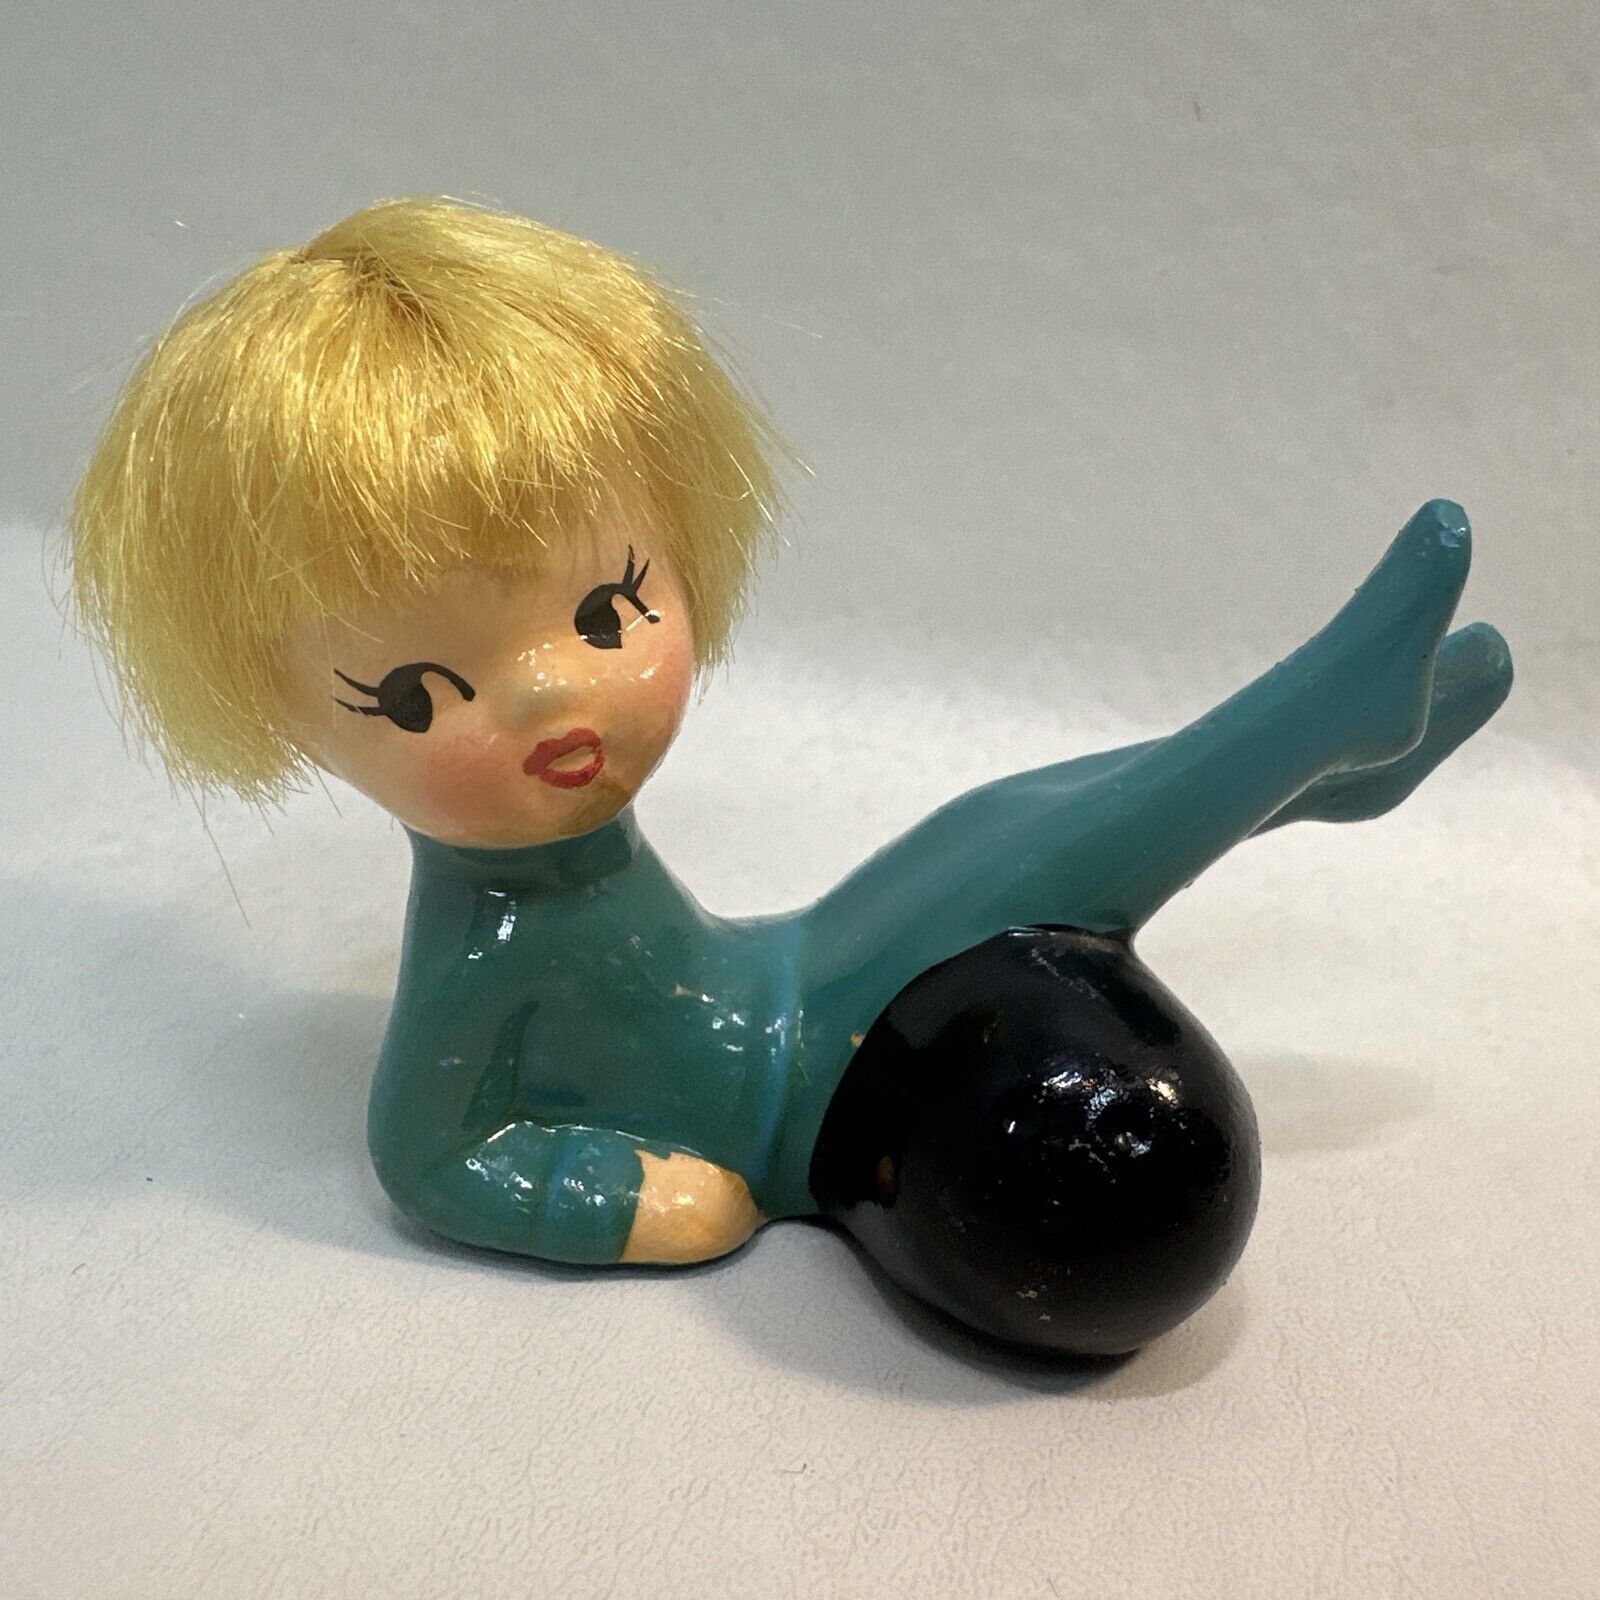 VtG Blonde Haired Girl With Bowling Ball 1960’s MCM-E-3700